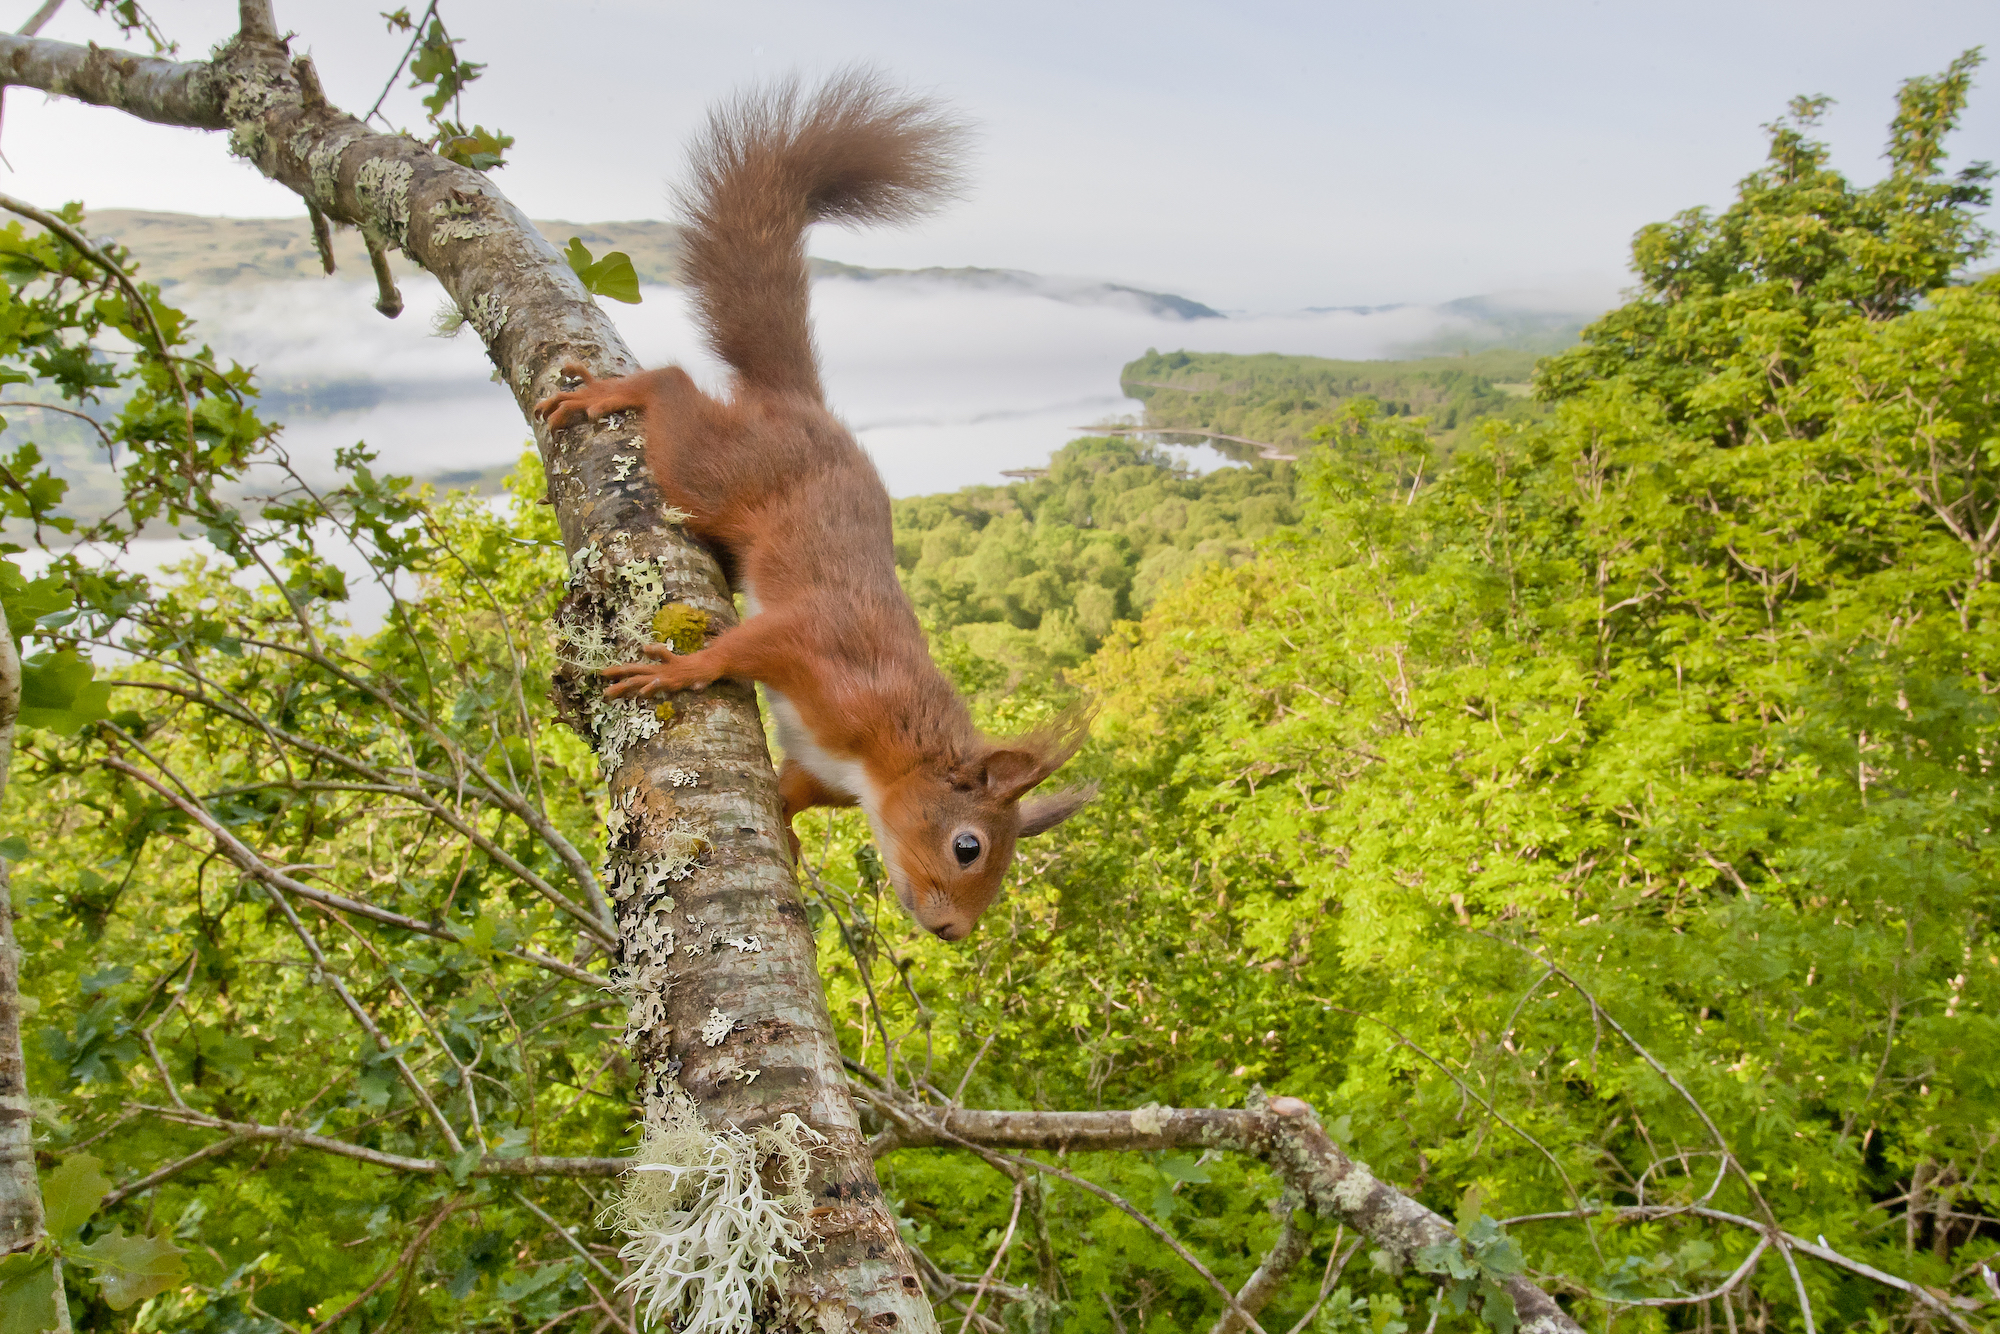 A red squirrel surrounded by greenery